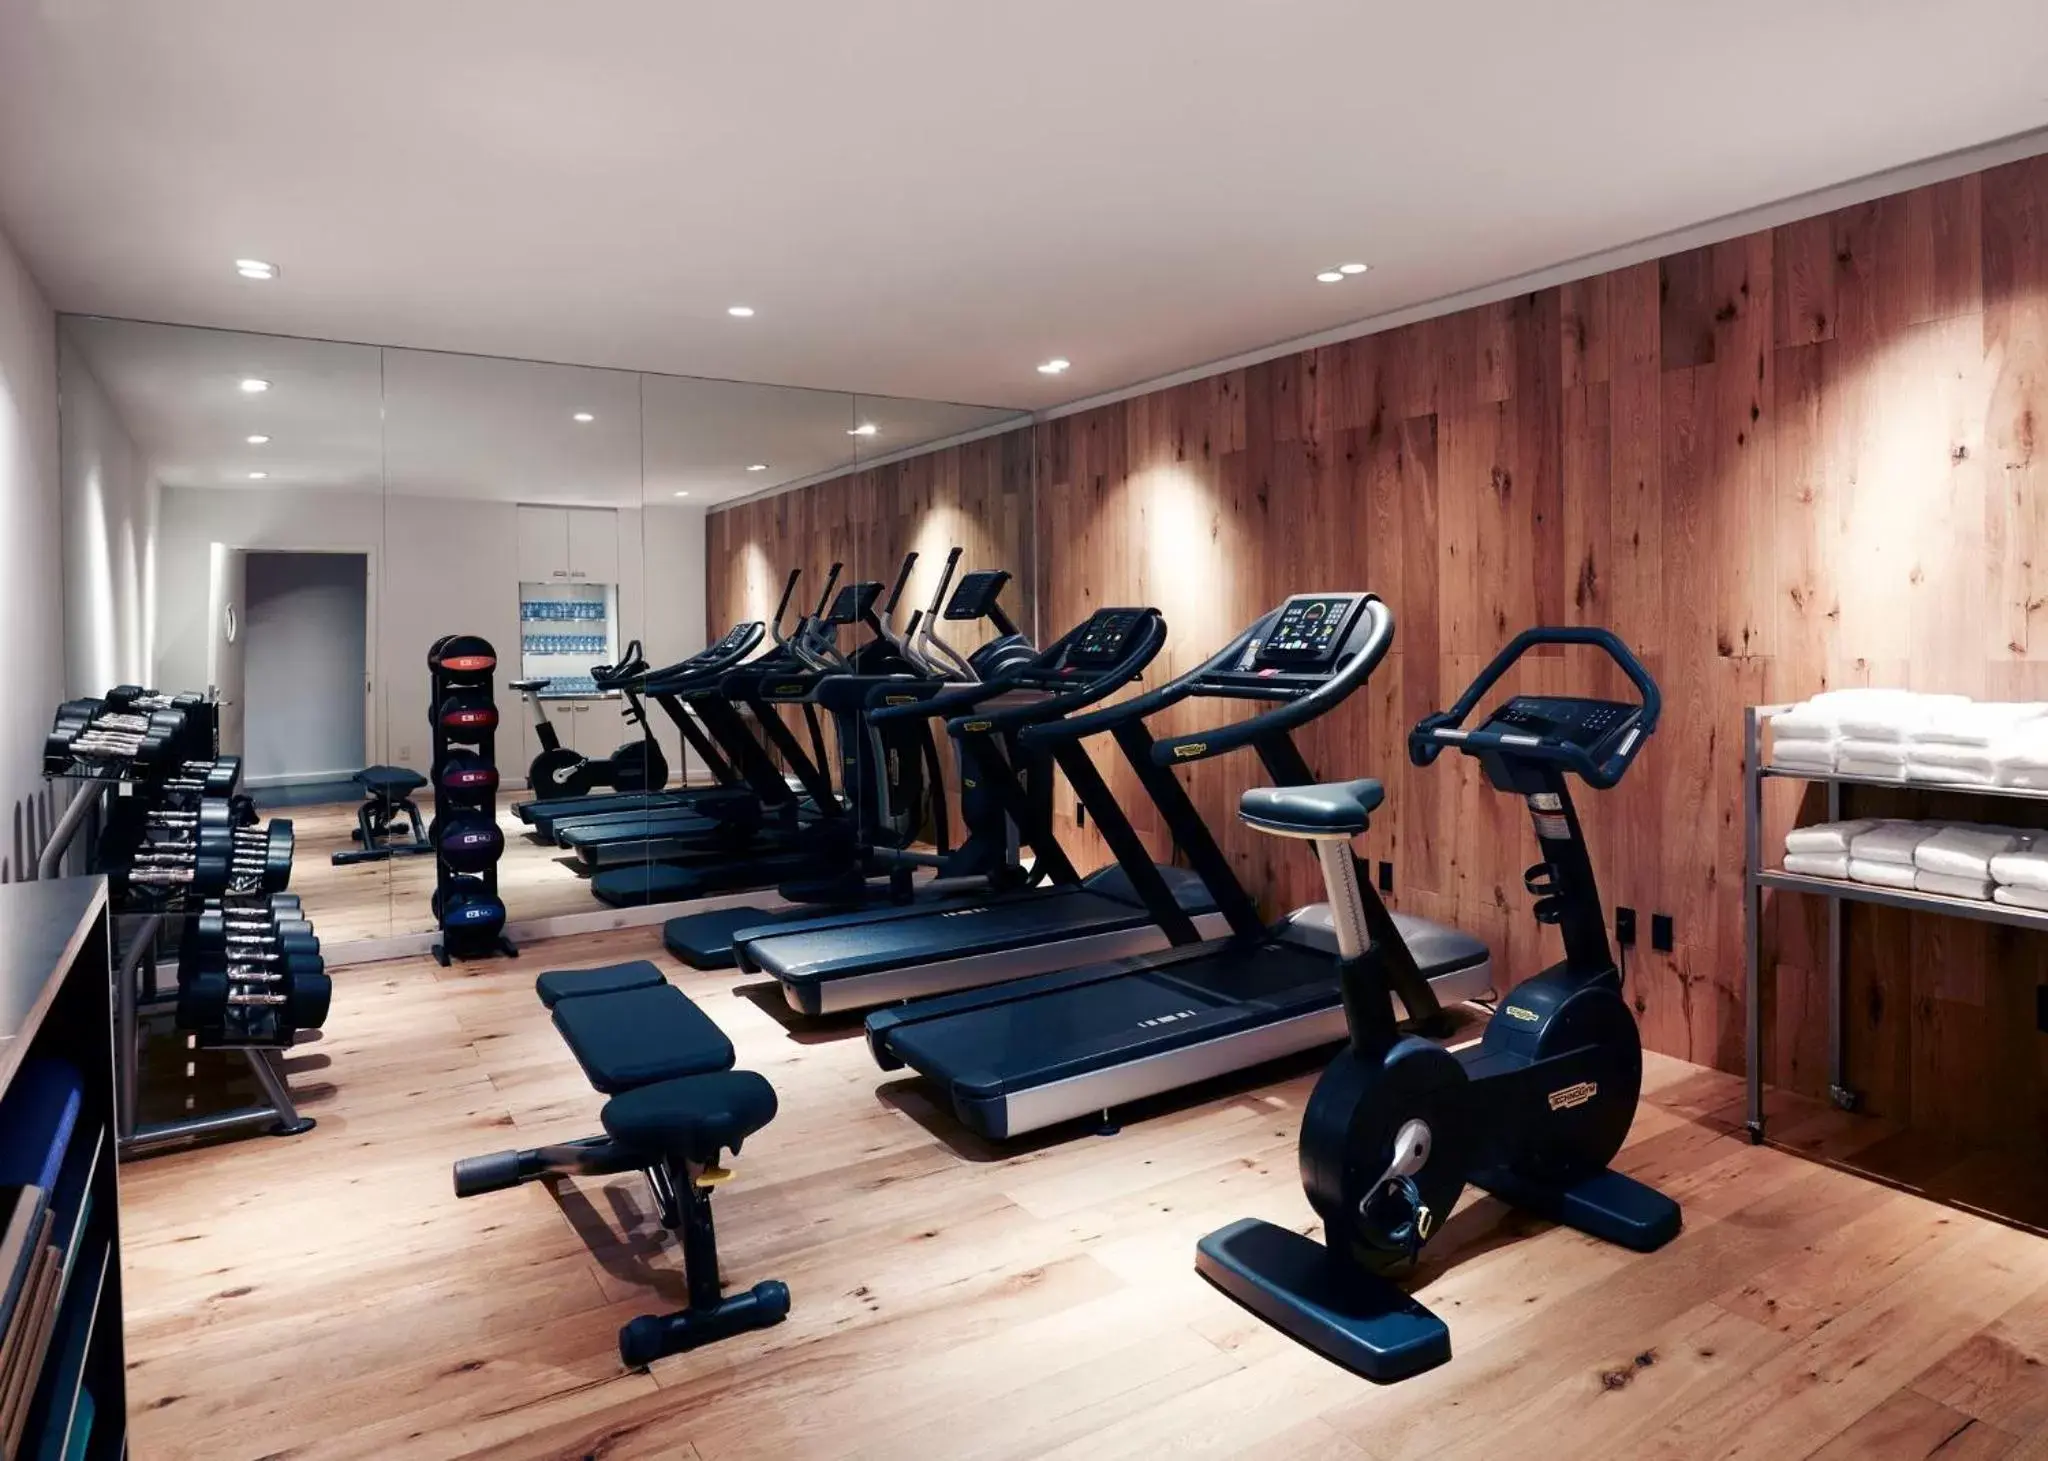 Fitness centre/facilities, Fitness Center/Facilities in citizenM New York Bowery